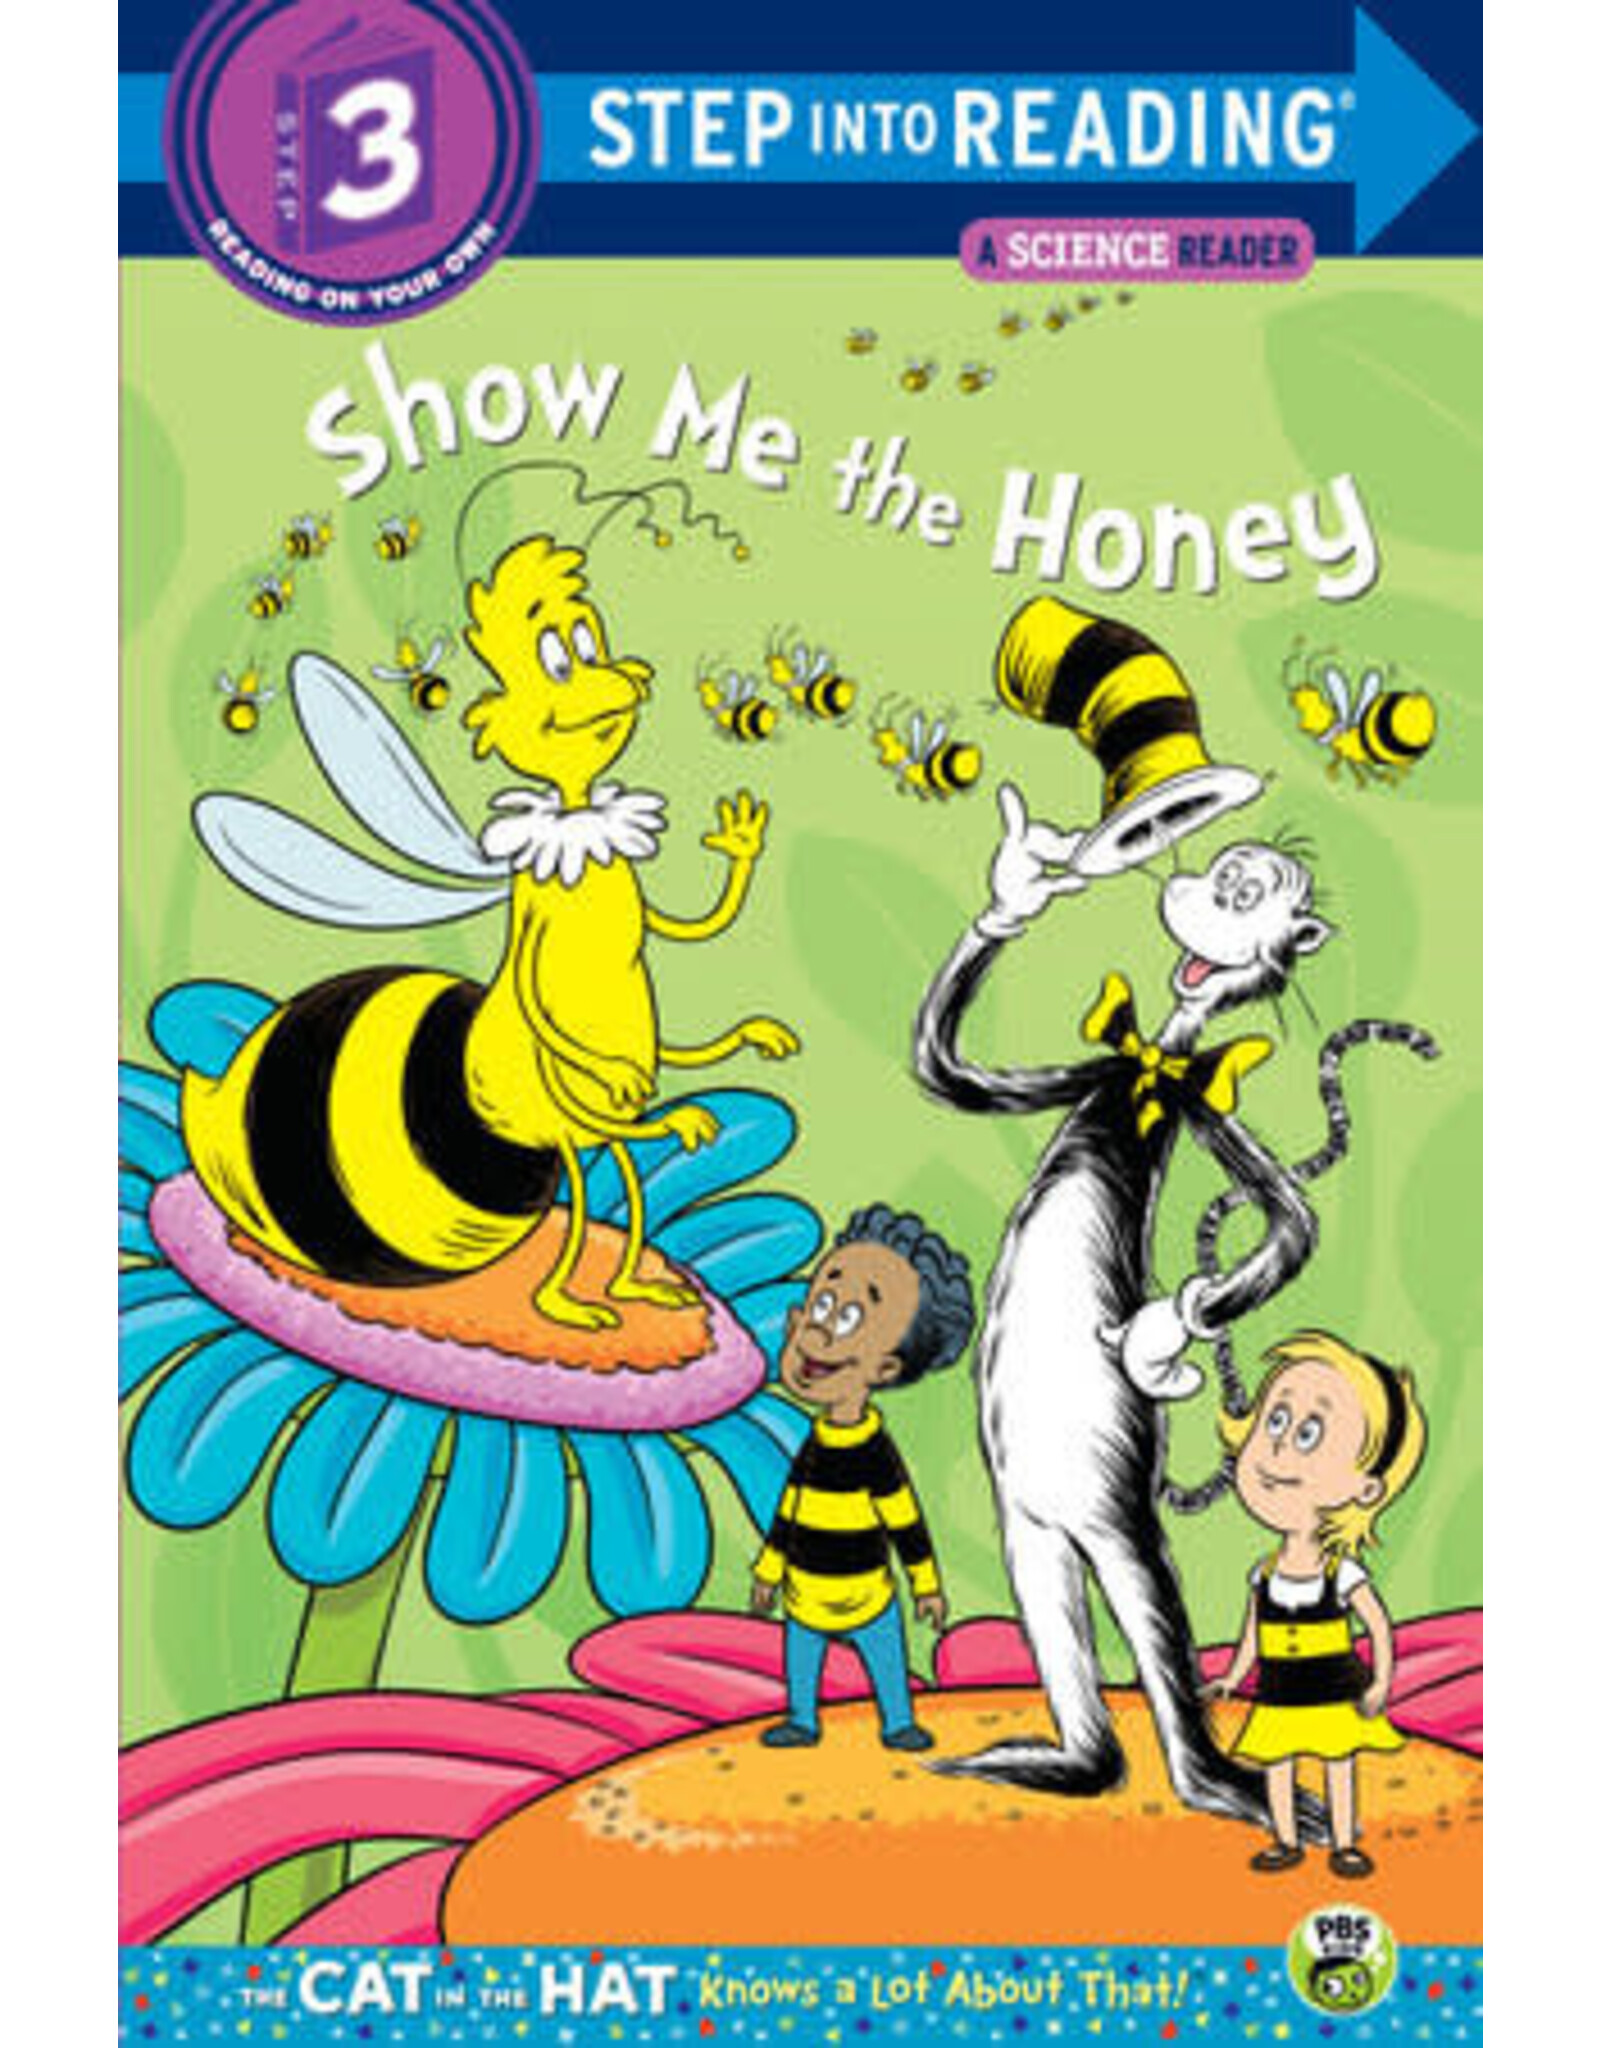 Step Into Reading Step Into Reading - Show me the Honey (Dr. Seuss/Cat in the Hat) (Step 3)